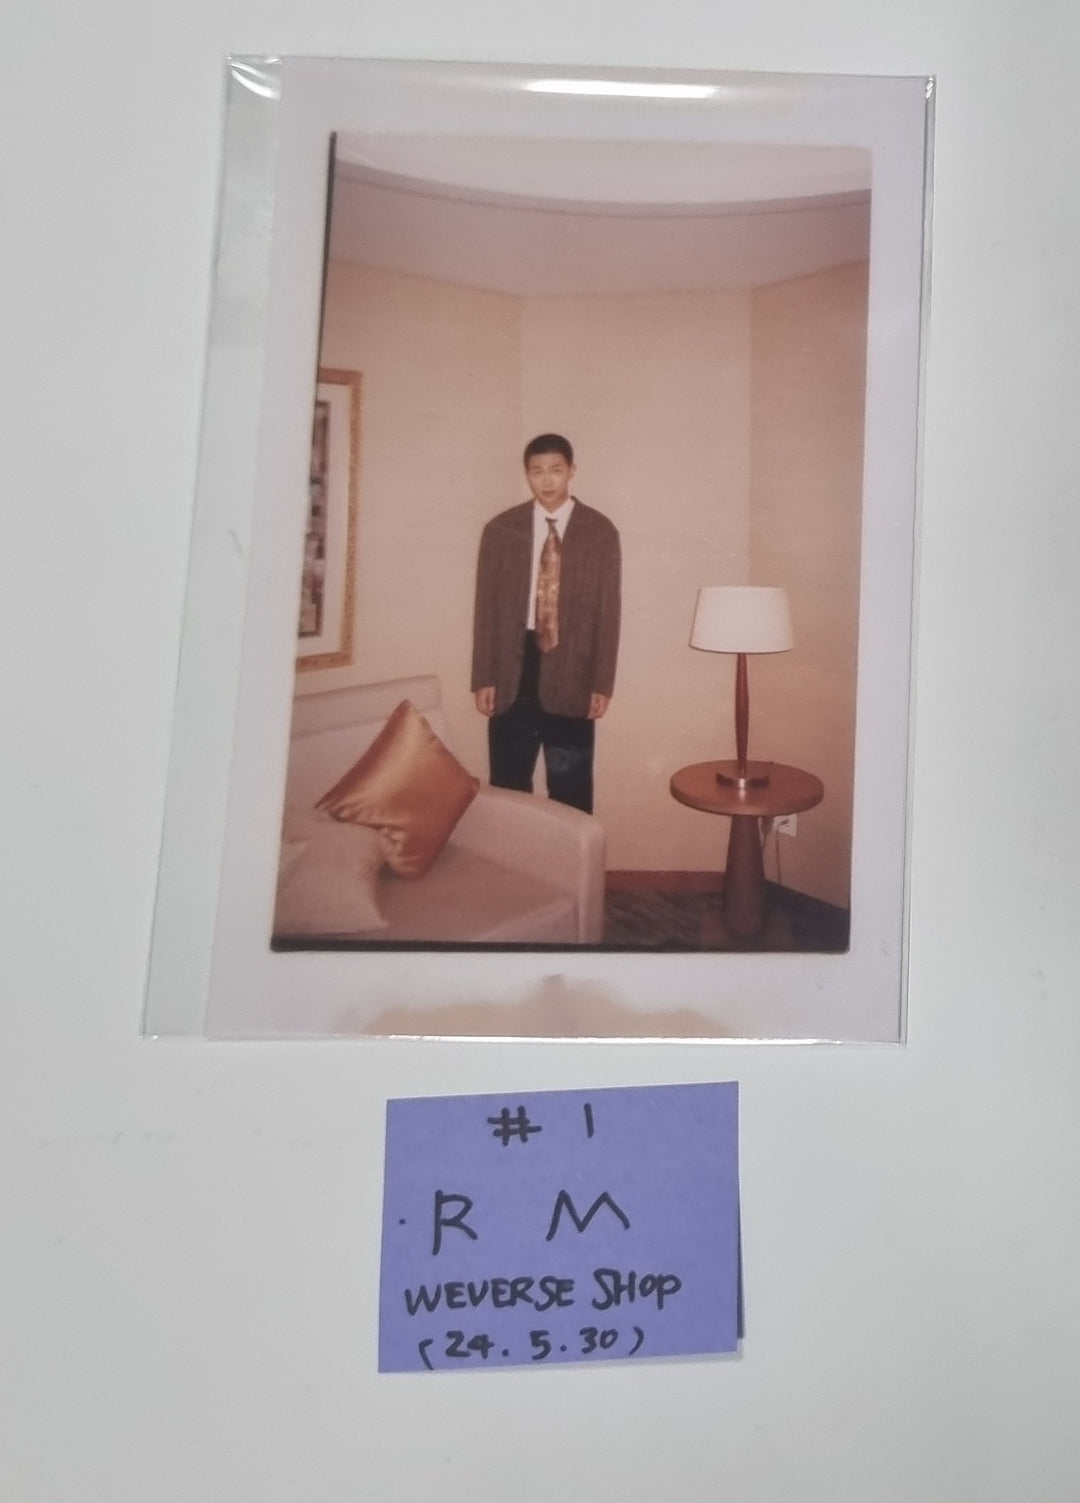 RM "Right Place, Wrong Person" - Weverse Shop Pre-Order Benefit Photo [Restocked 5/31]